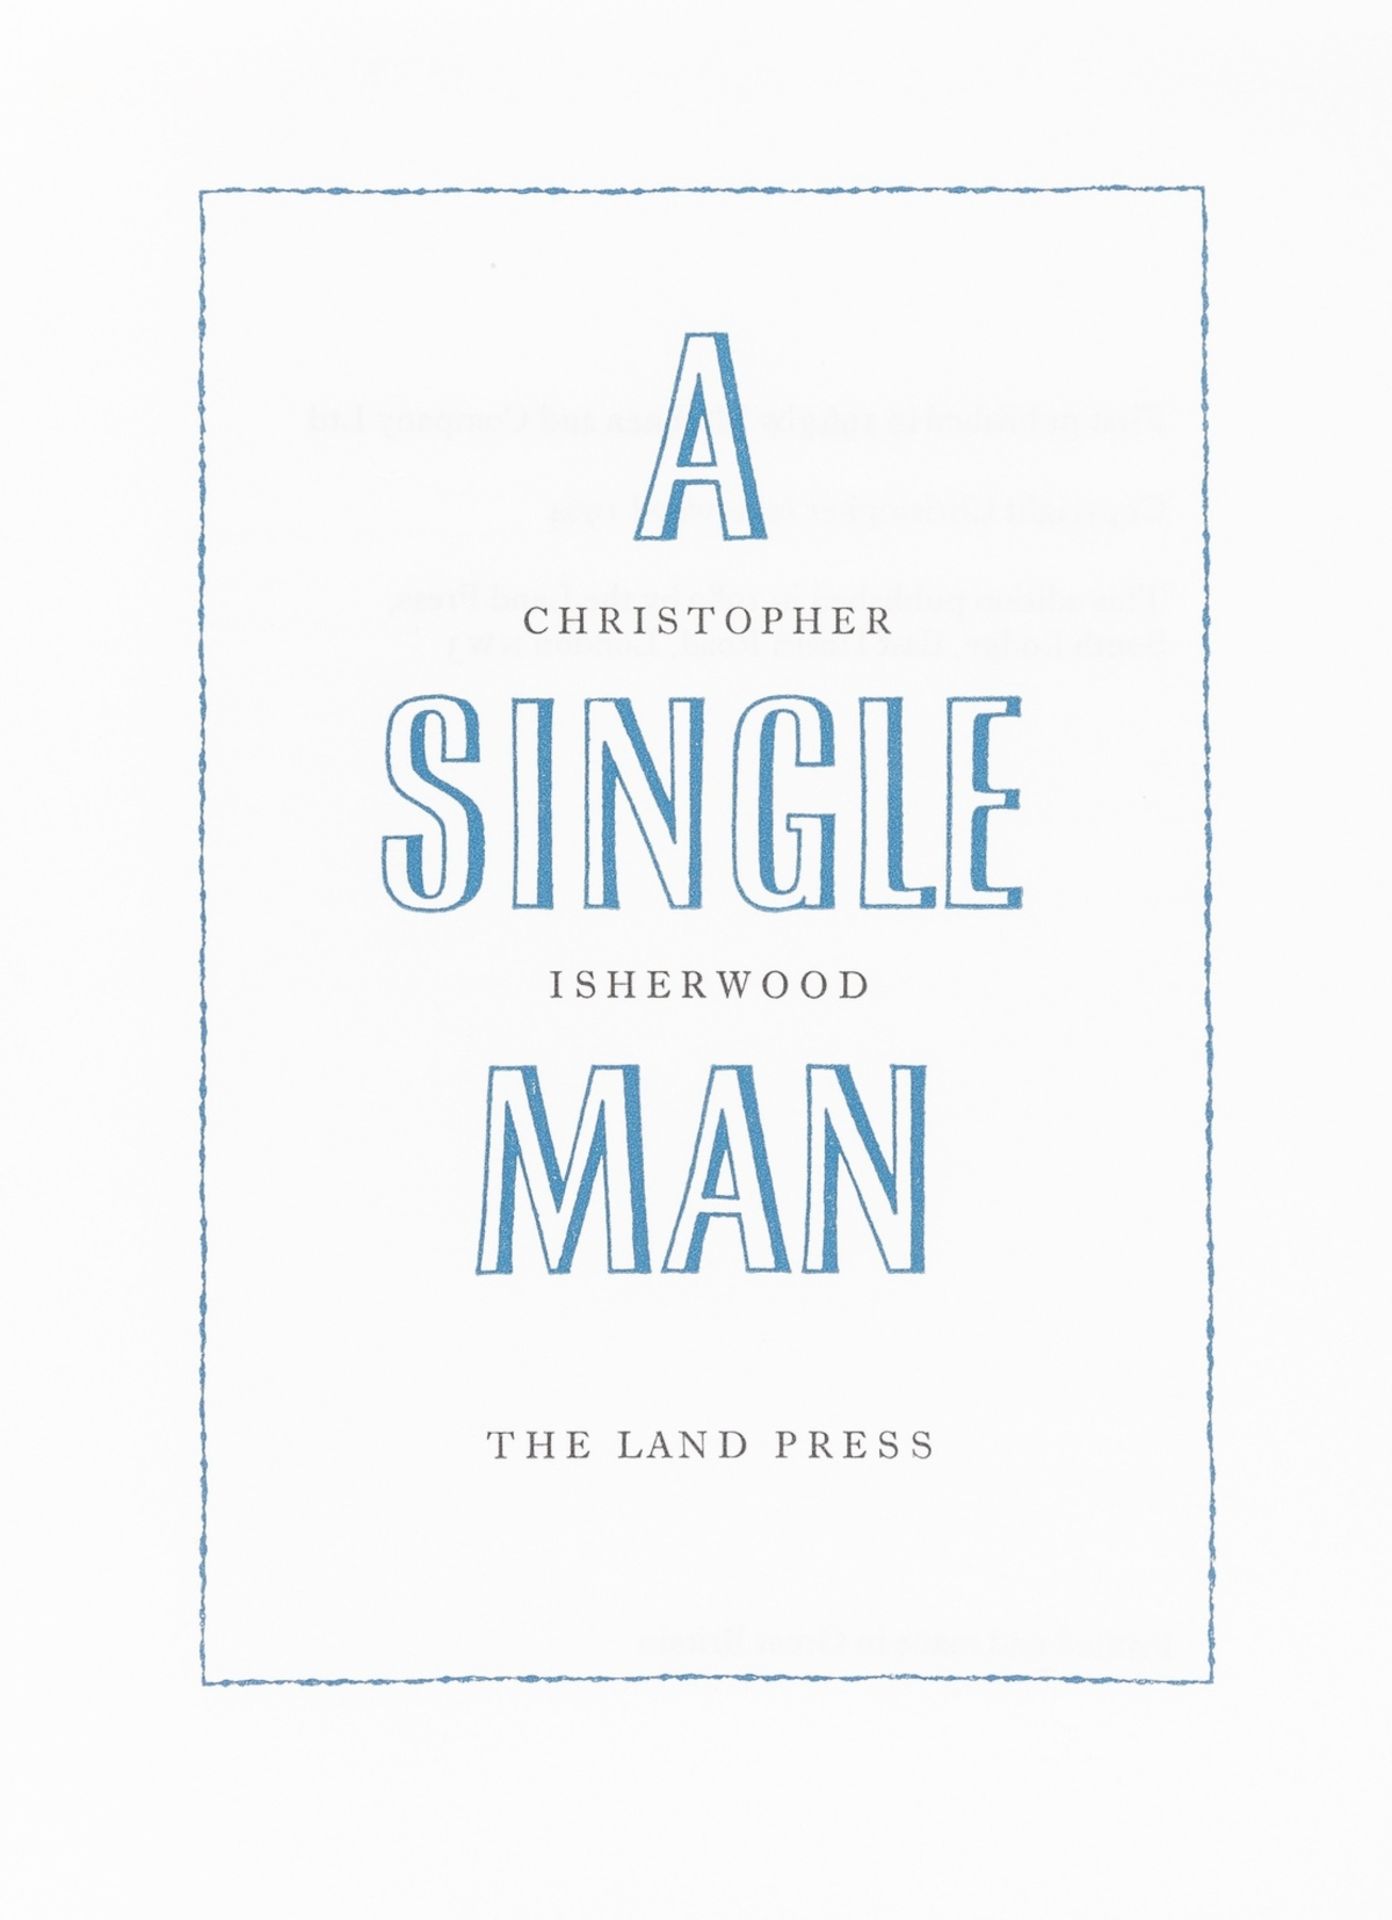 Isherwood (Christopher) A Single Man, out-of-series copy from an edition of 400 signed by author, … - Image 2 of 2